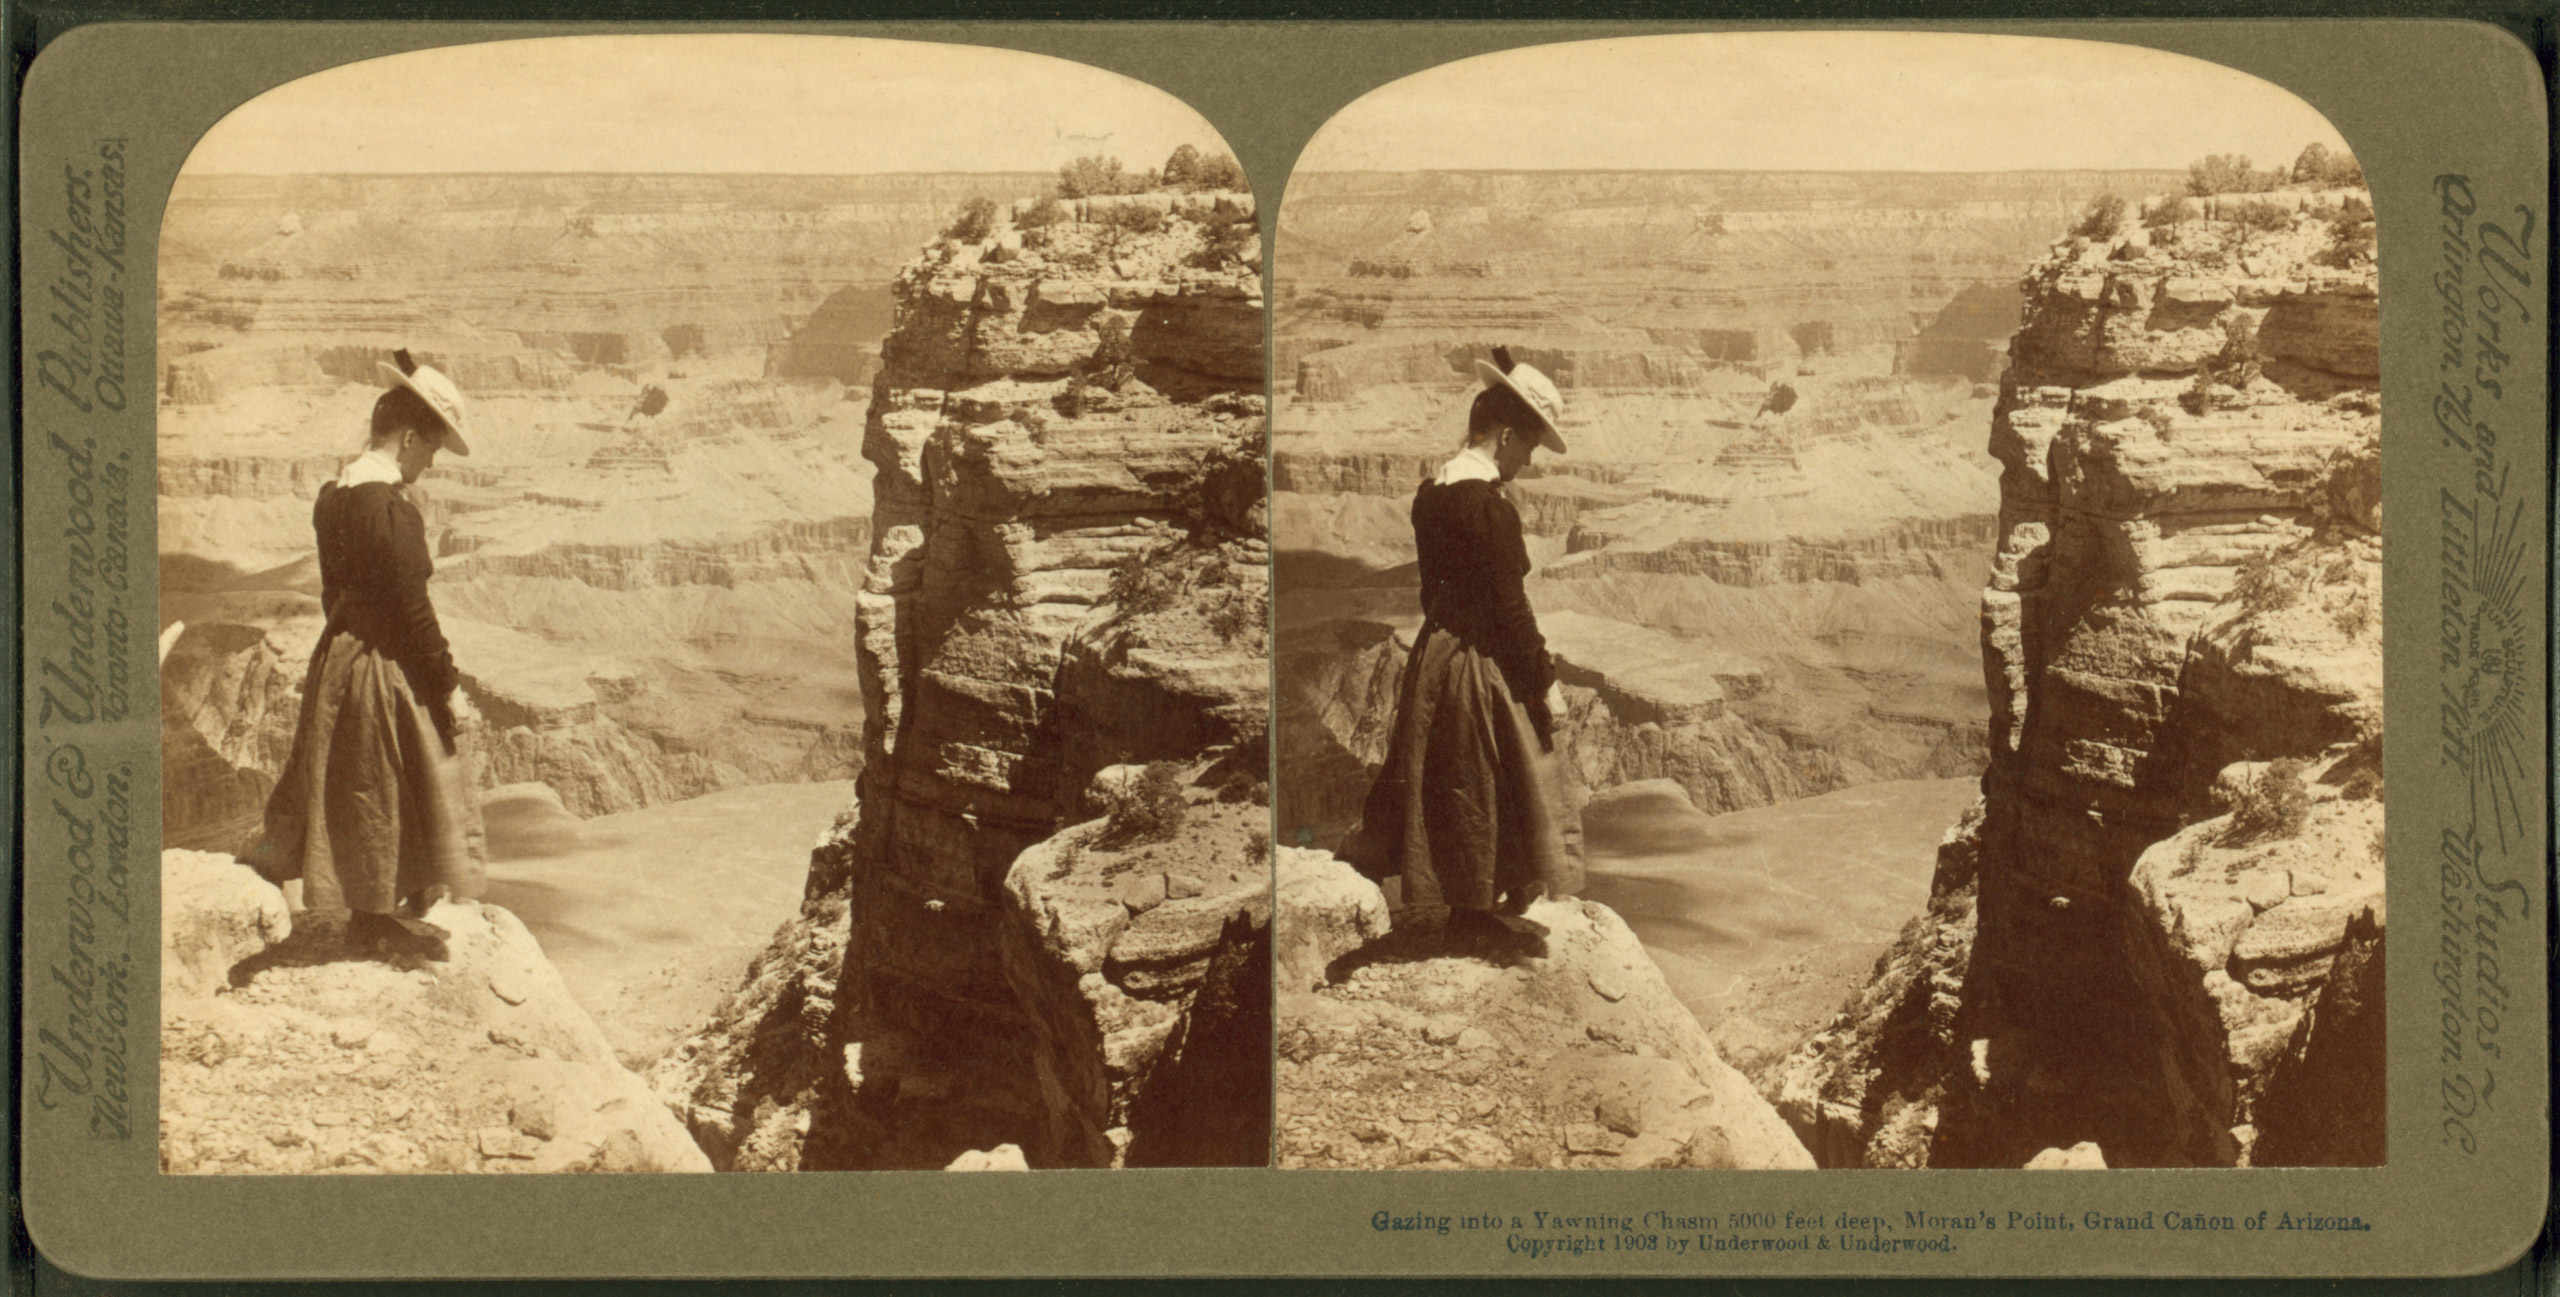 Gazing into a yawning chasm 5000 feet deep, Moran's Point,  circa 1902-1903. Stereoscopic view of the Grand Canyon.